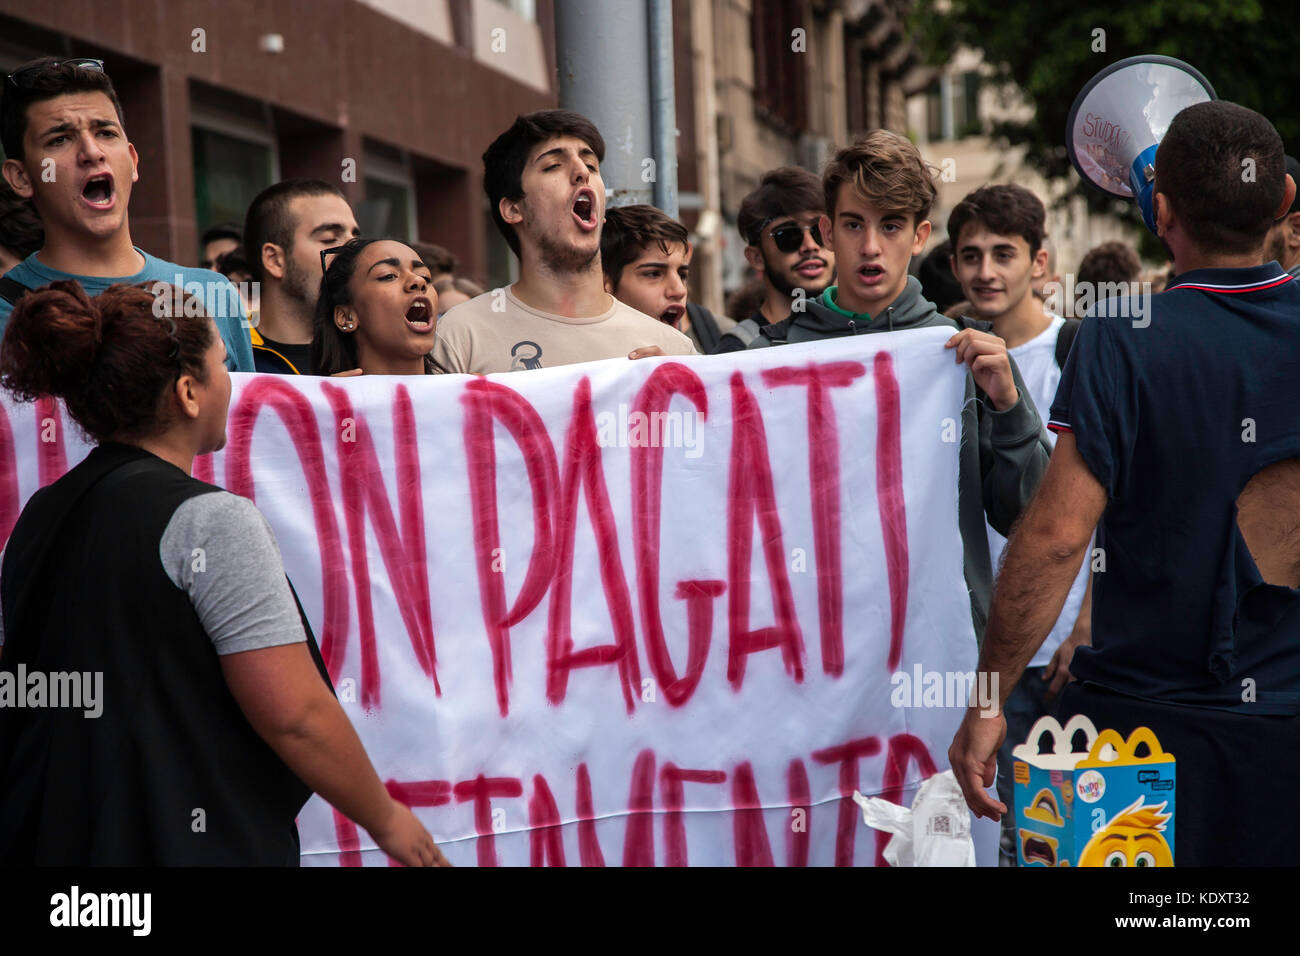 Hundreds of students protest in Palermo against the job school alternation provided by Good School Law. Stock Photo